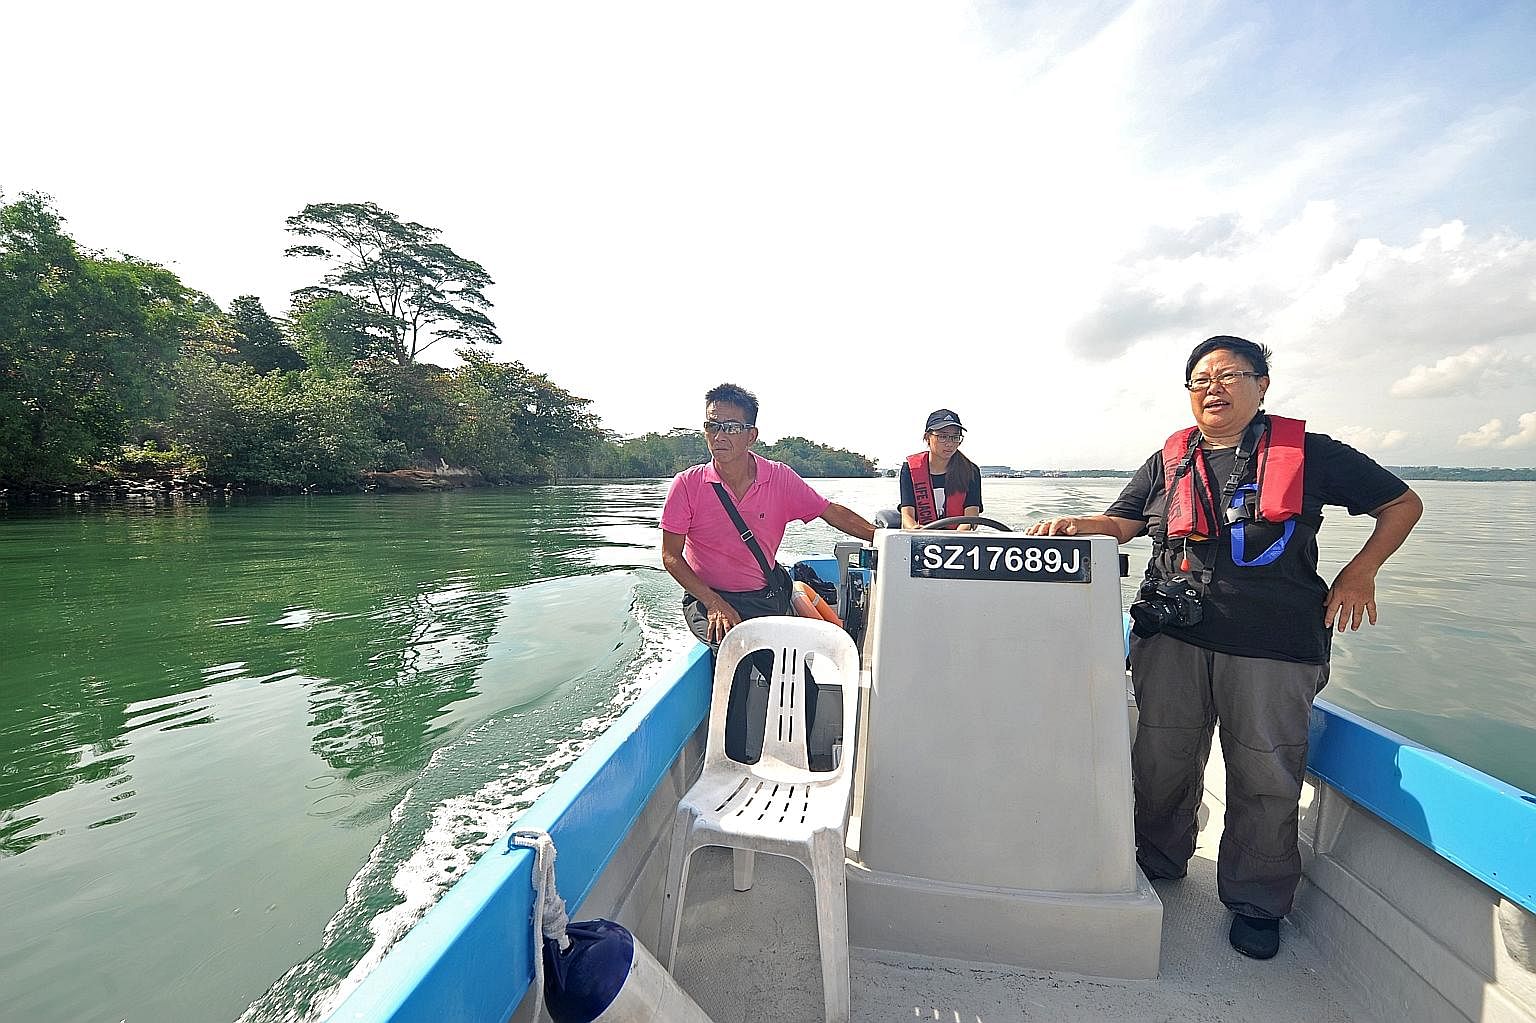 (From left) Ubin fish farmer Philip Lim, geography student Vanessa Teo and Pesta Ubin coordinator Ria Tan on a boat tour through Ubin's mangroves. Go kayaking at Ubin Quarry (above) with Outward Bound Singapore instructors. Explore Ubin town.